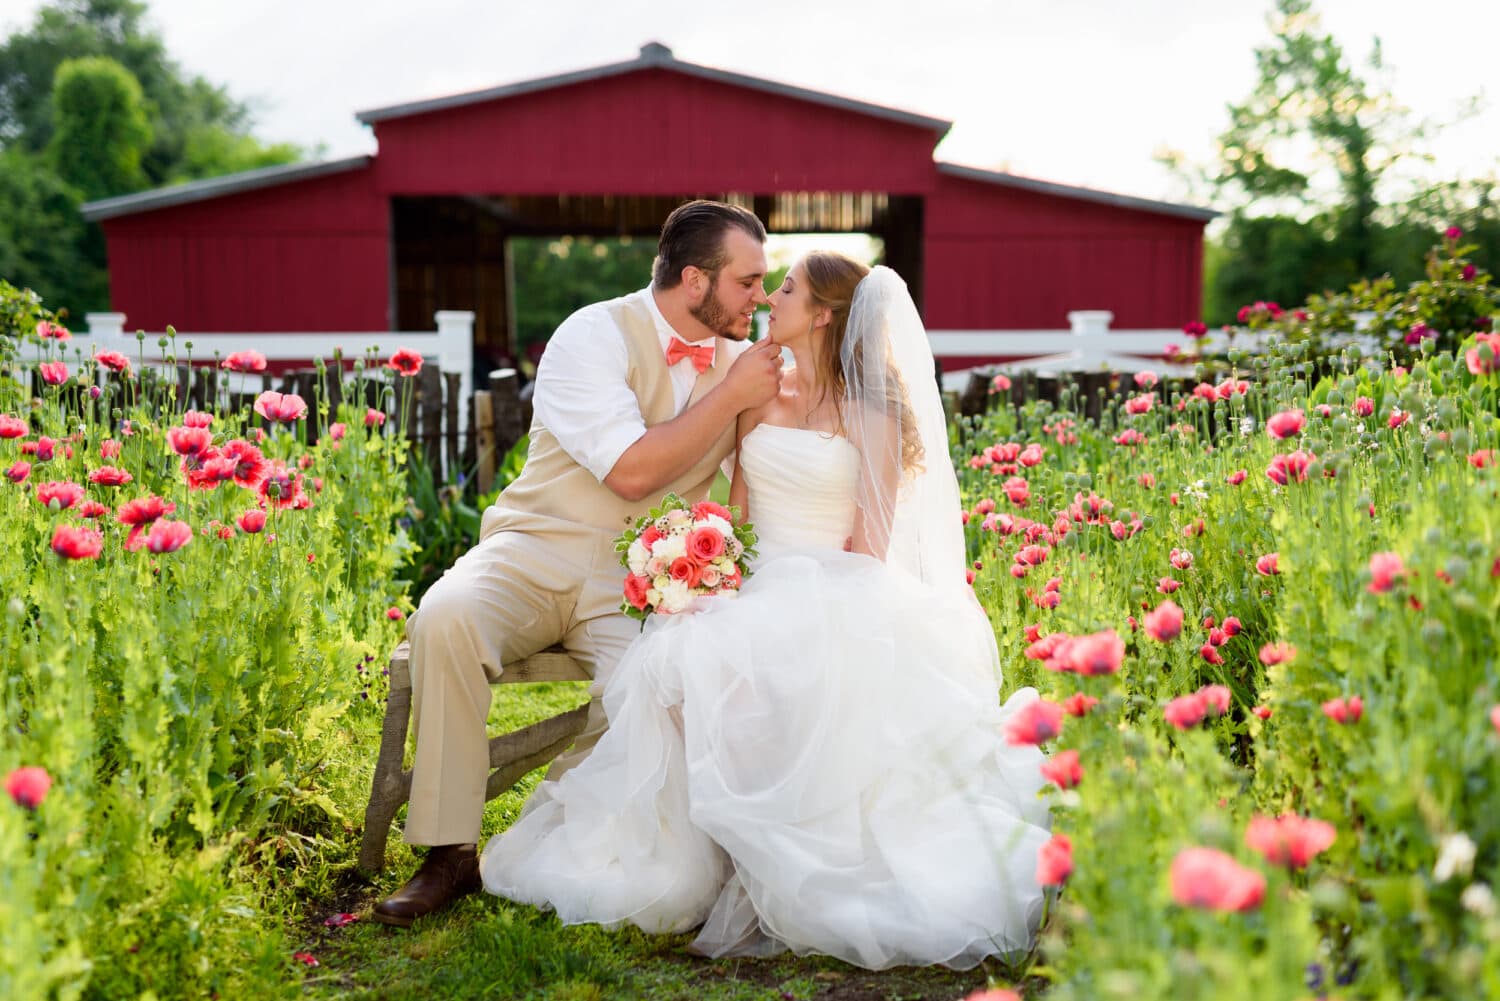 About to kiss in the garden - Wildberry Farm 